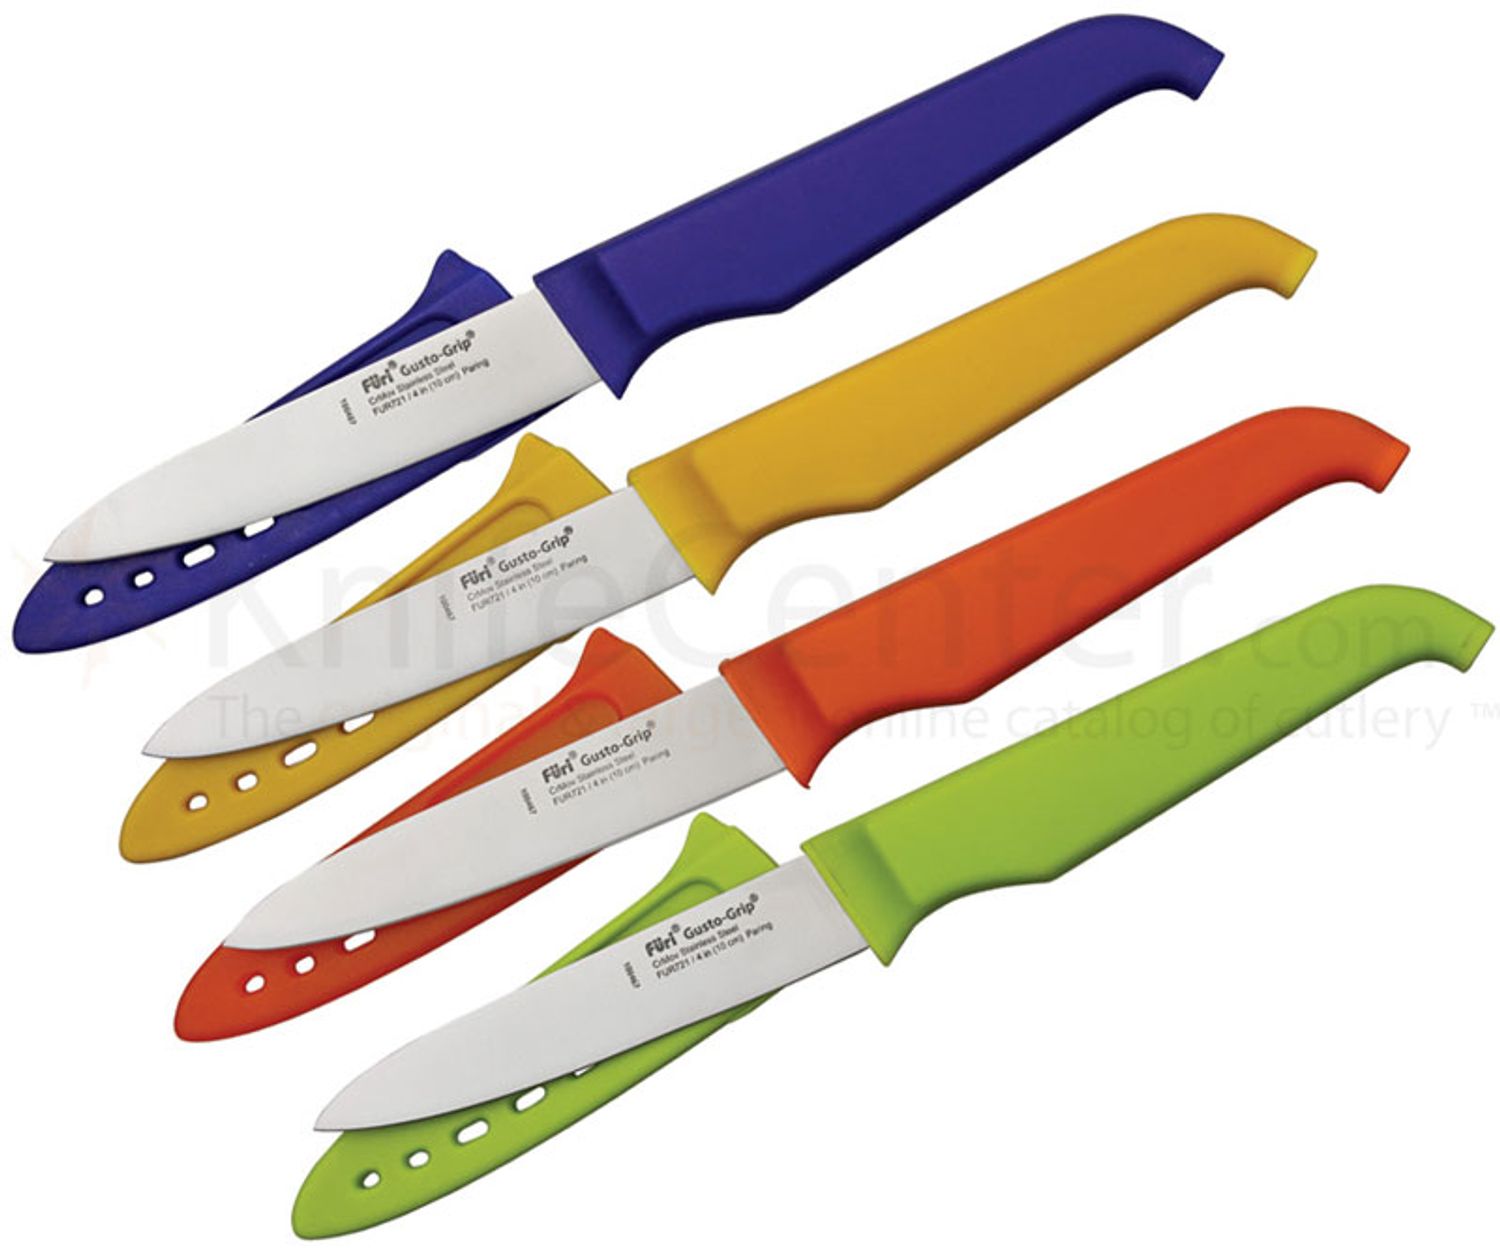 Furi Rachael Ray 4-Inch Paring Knife with Blade Guard